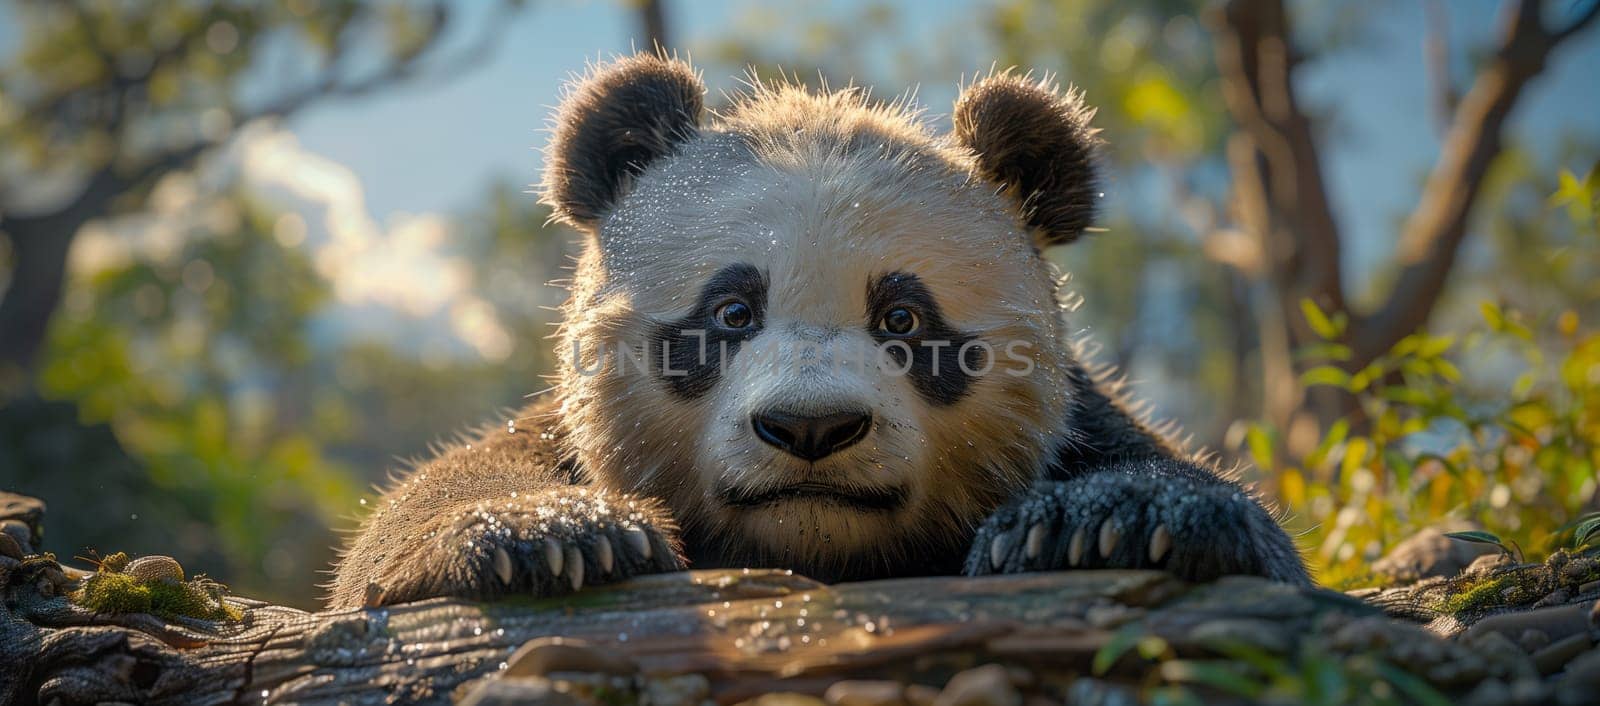 A terrestrial Carnivore, the panda bear, is lying on a rock in the jungle, surrounded by terrestrial plants and water. Its fur shines as it looks at the camera with its innocent snout